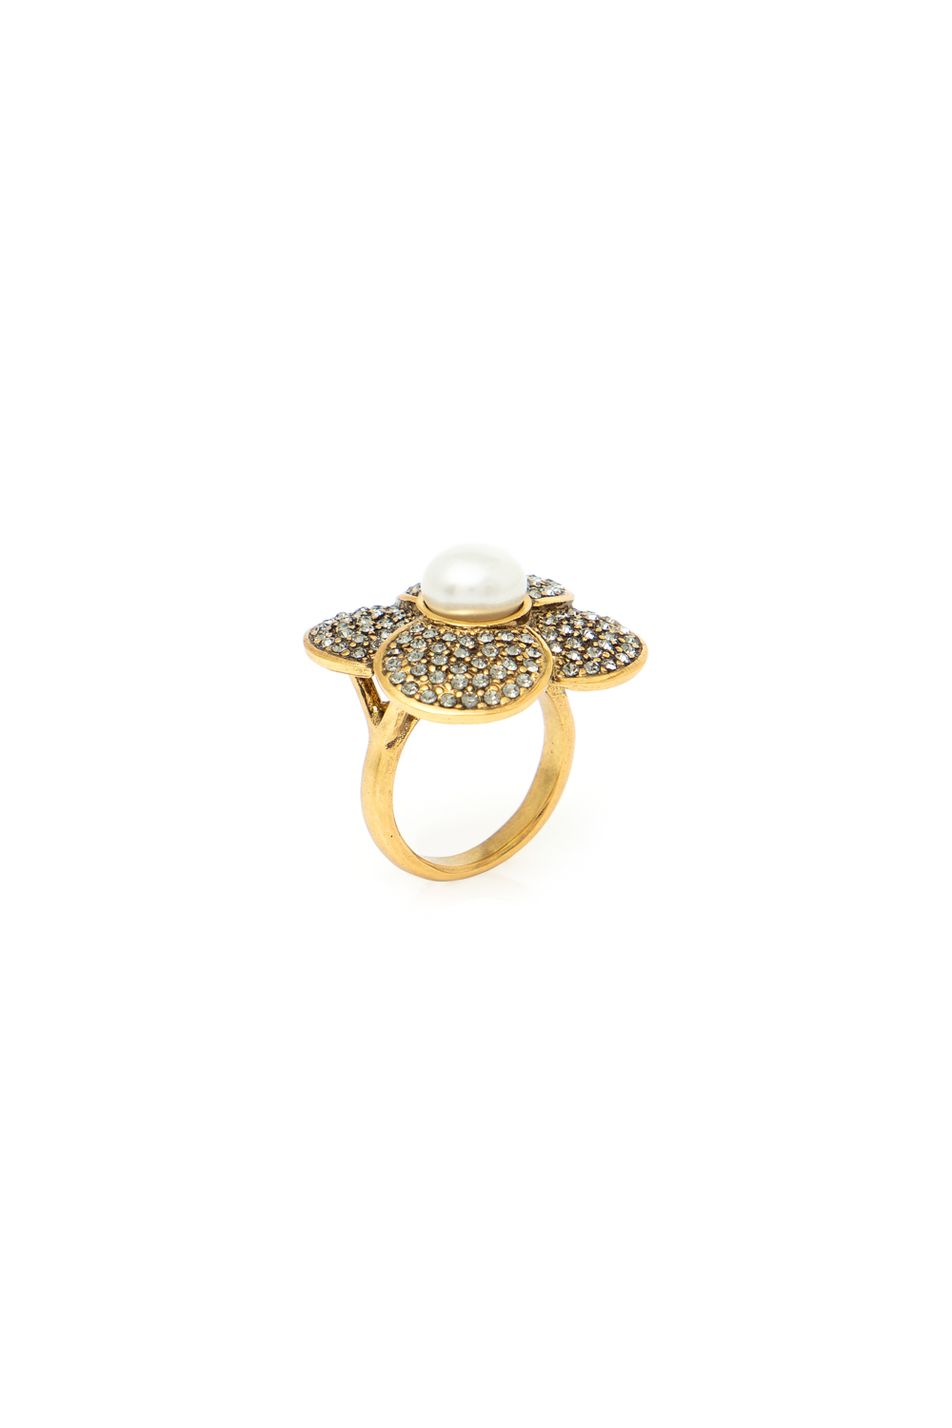 Anel Pearl Flower - Ouro Vintage - G